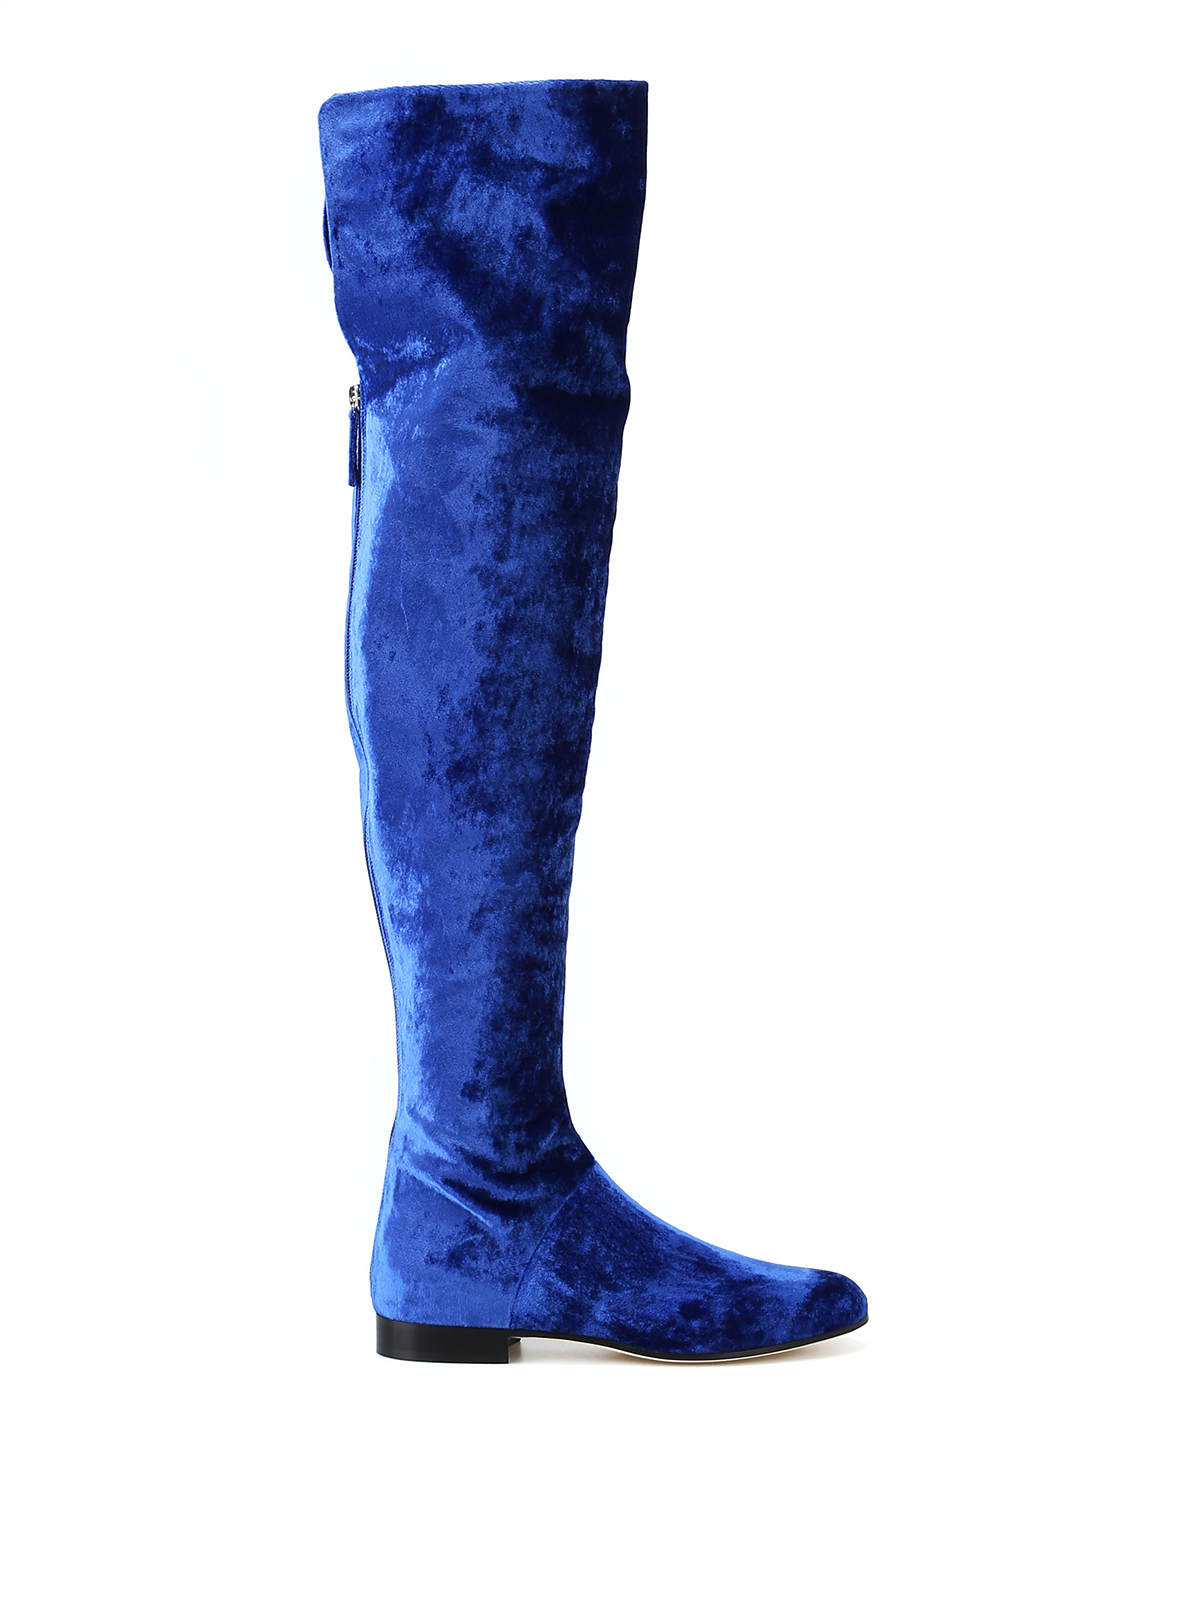 blue over the knee boots